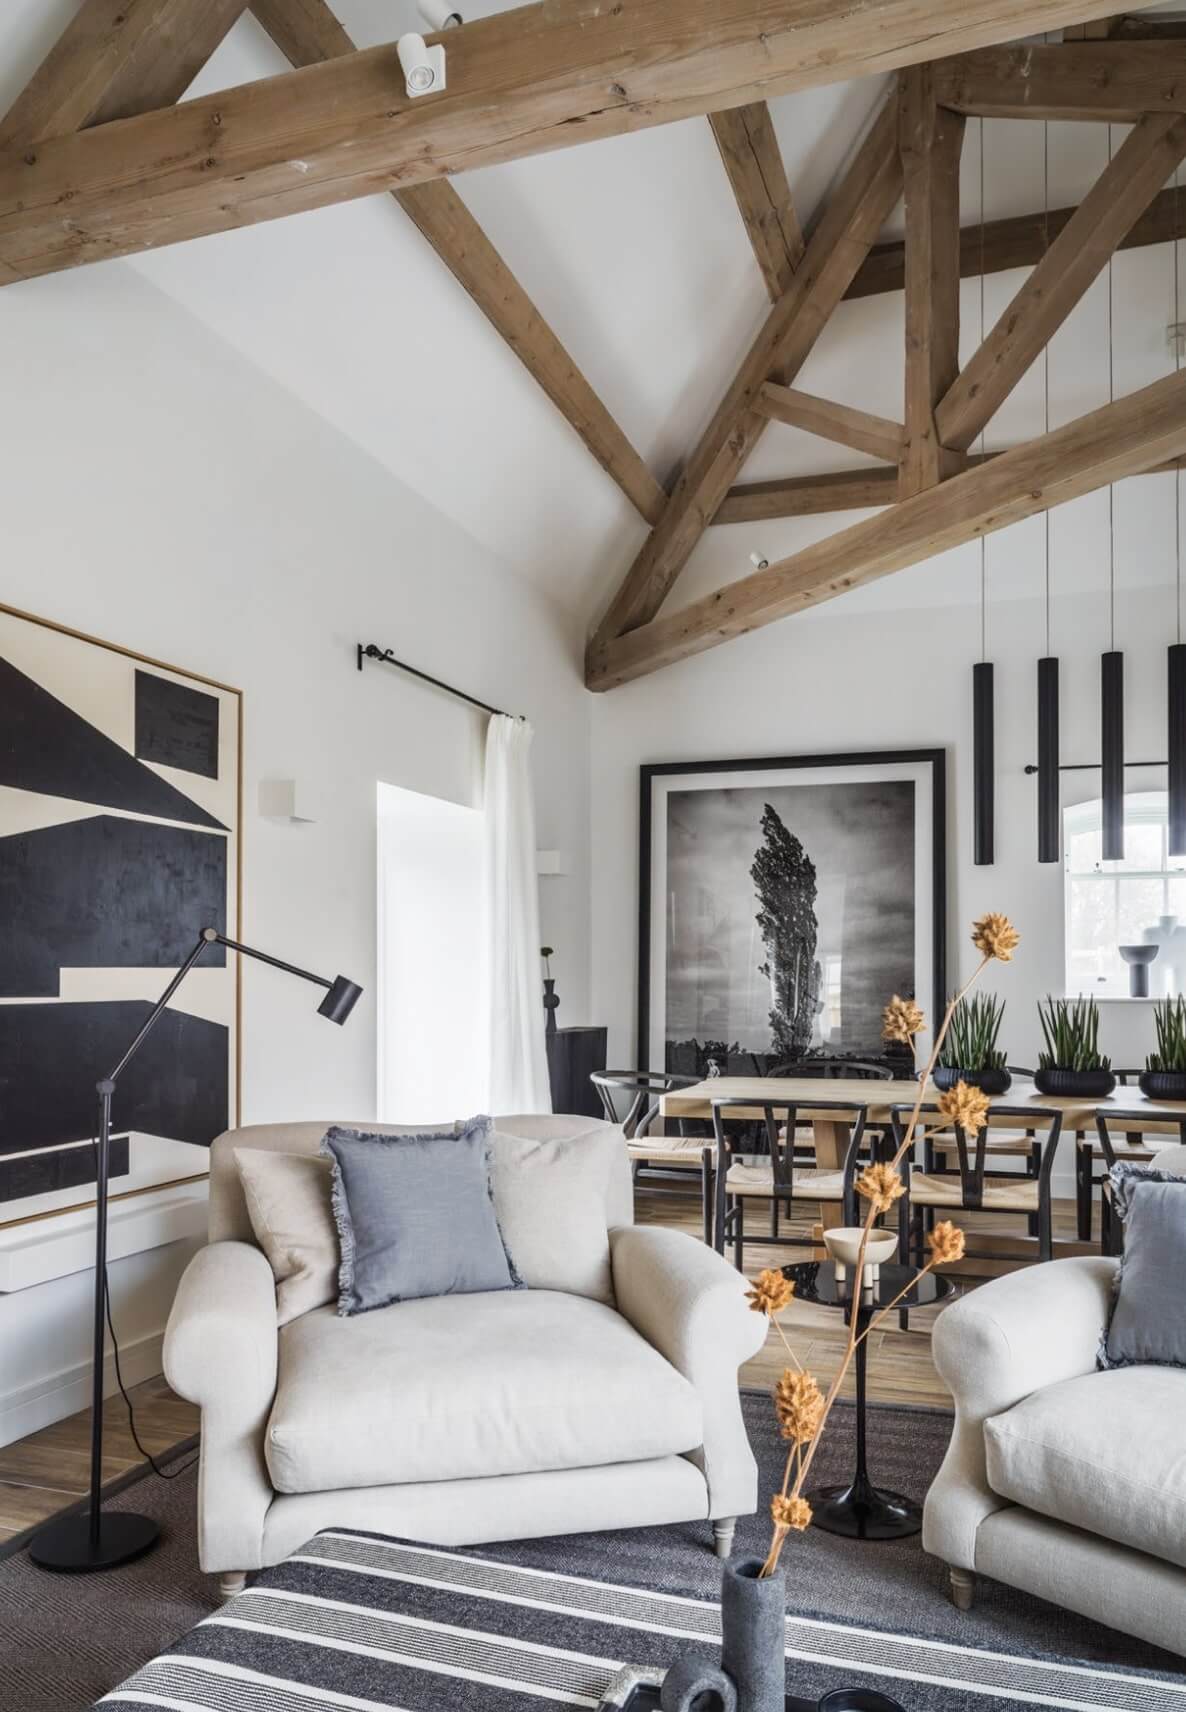 Kelly Hoppen designs her new home - a barn in the British countryside